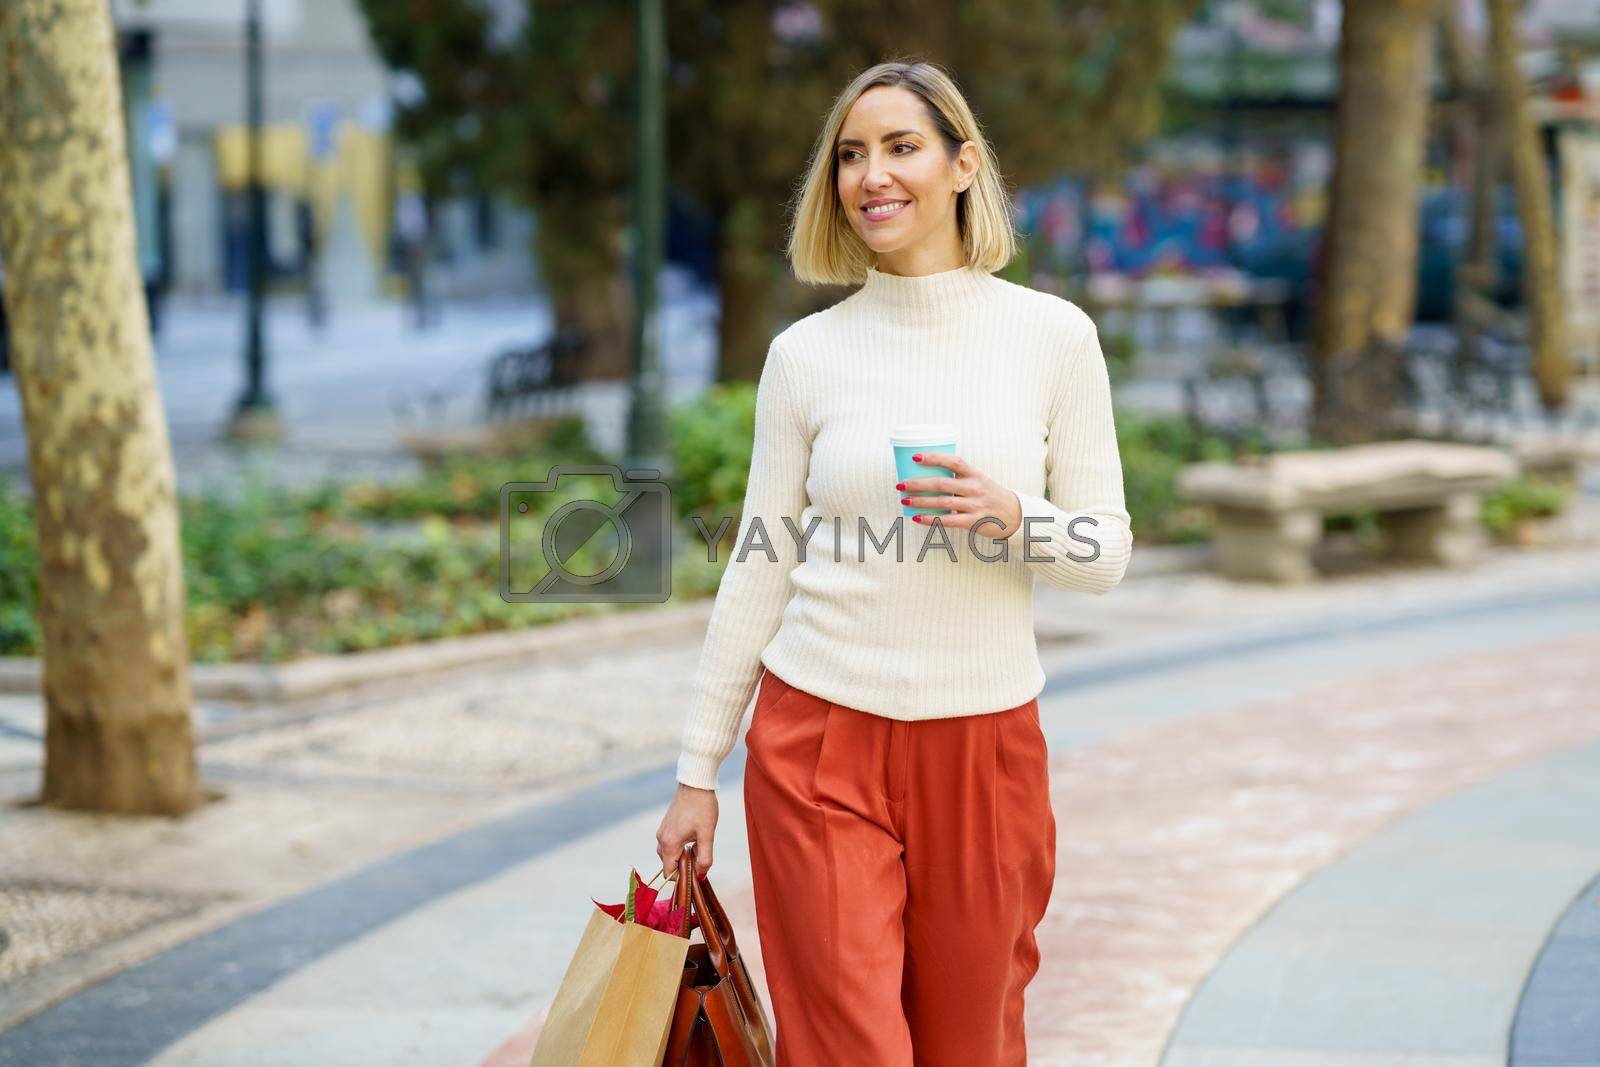 Royalty free image of Smiling woman with takeaway coffee carrying paper bag by javiindy